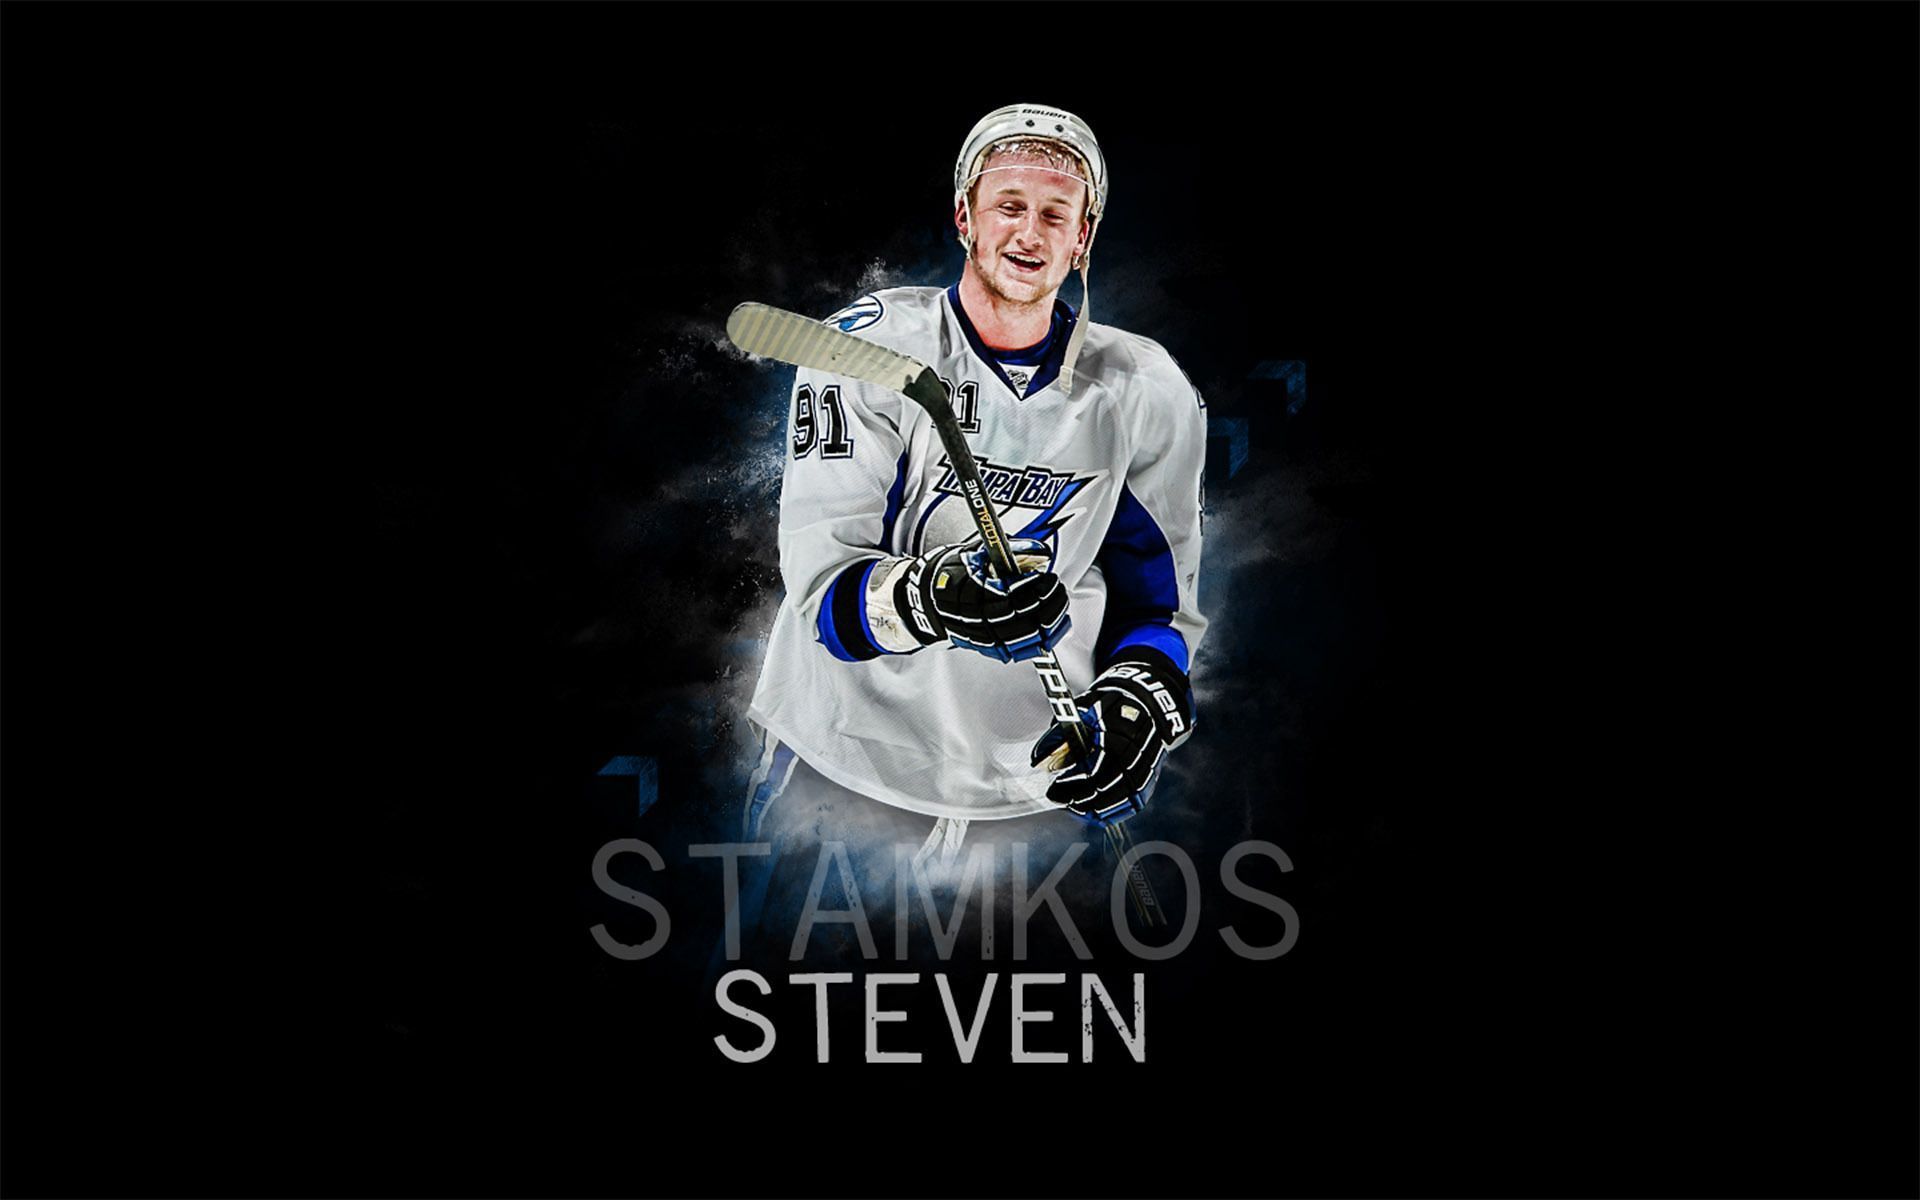 NHL player Steven Stemkos wallpapers and images - wallpapers